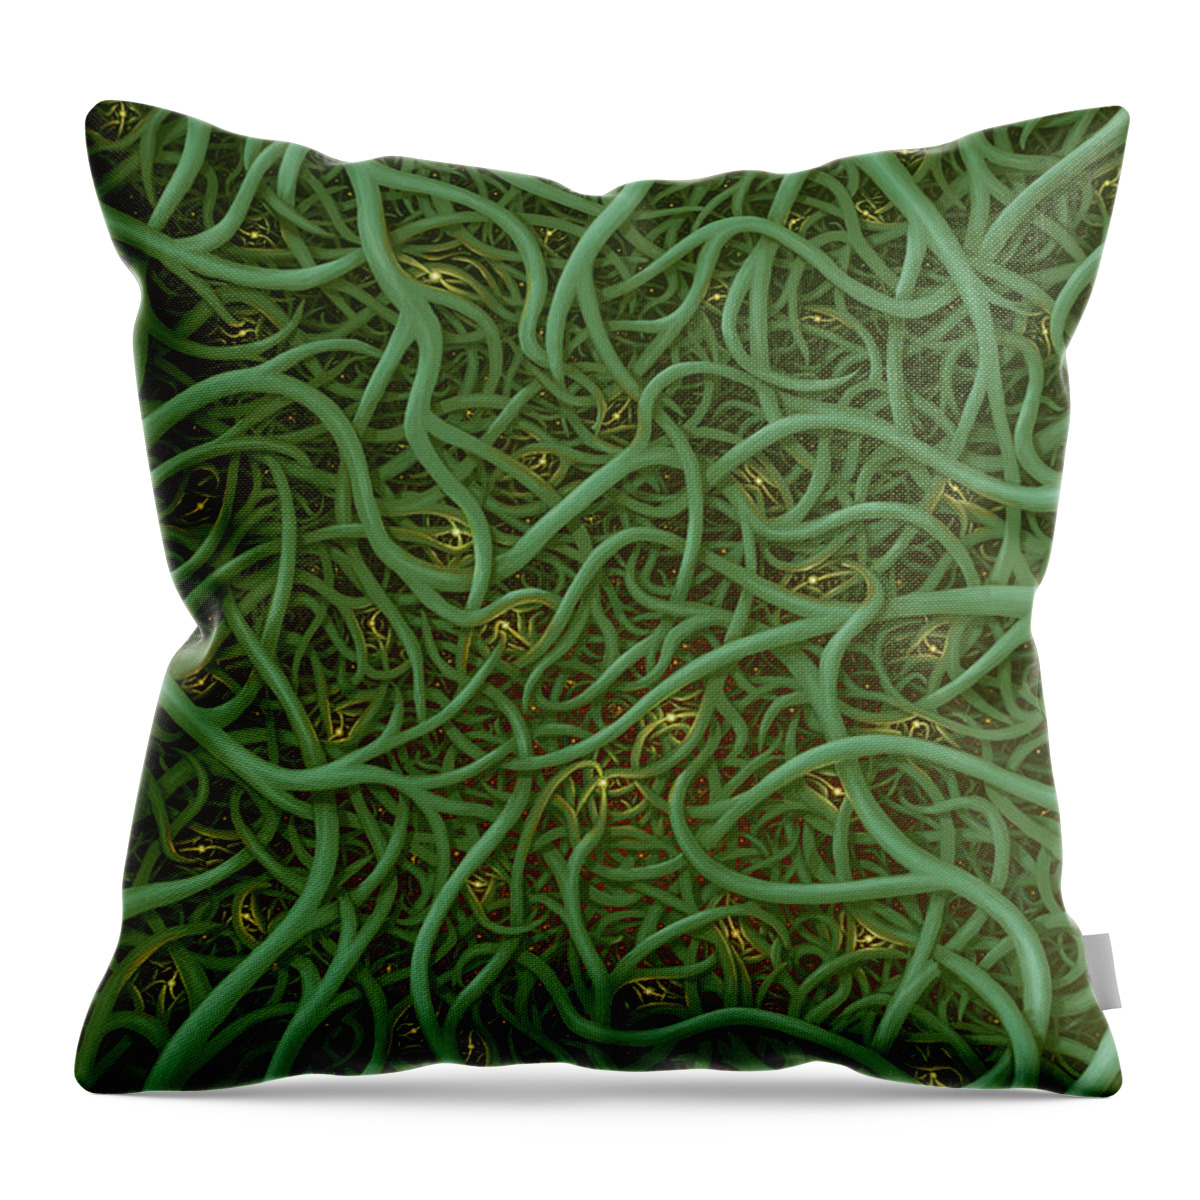 Concept. Surreal Throw Pillow featuring the painting Thermogenesis yellow by Jon Carroll Otterson